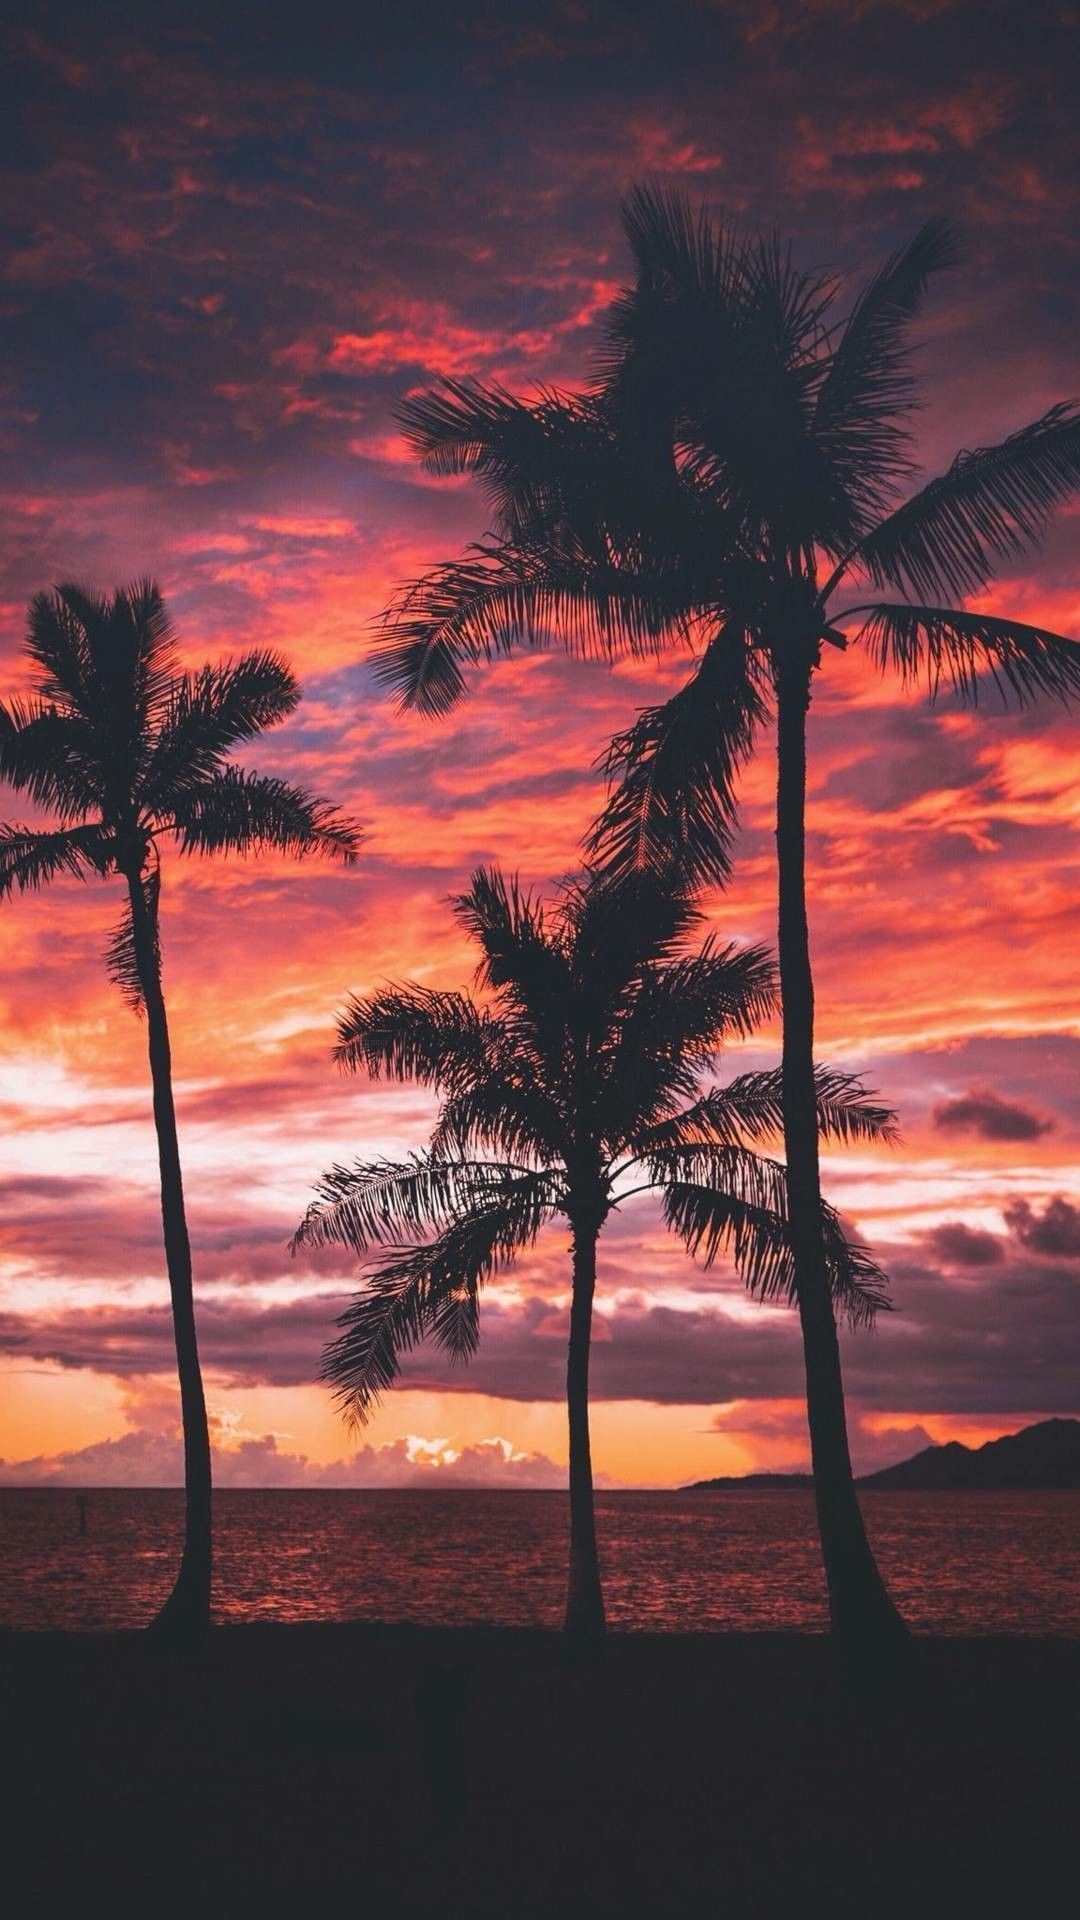 Three palm trees in front of a sunset - Sunset, palm tree